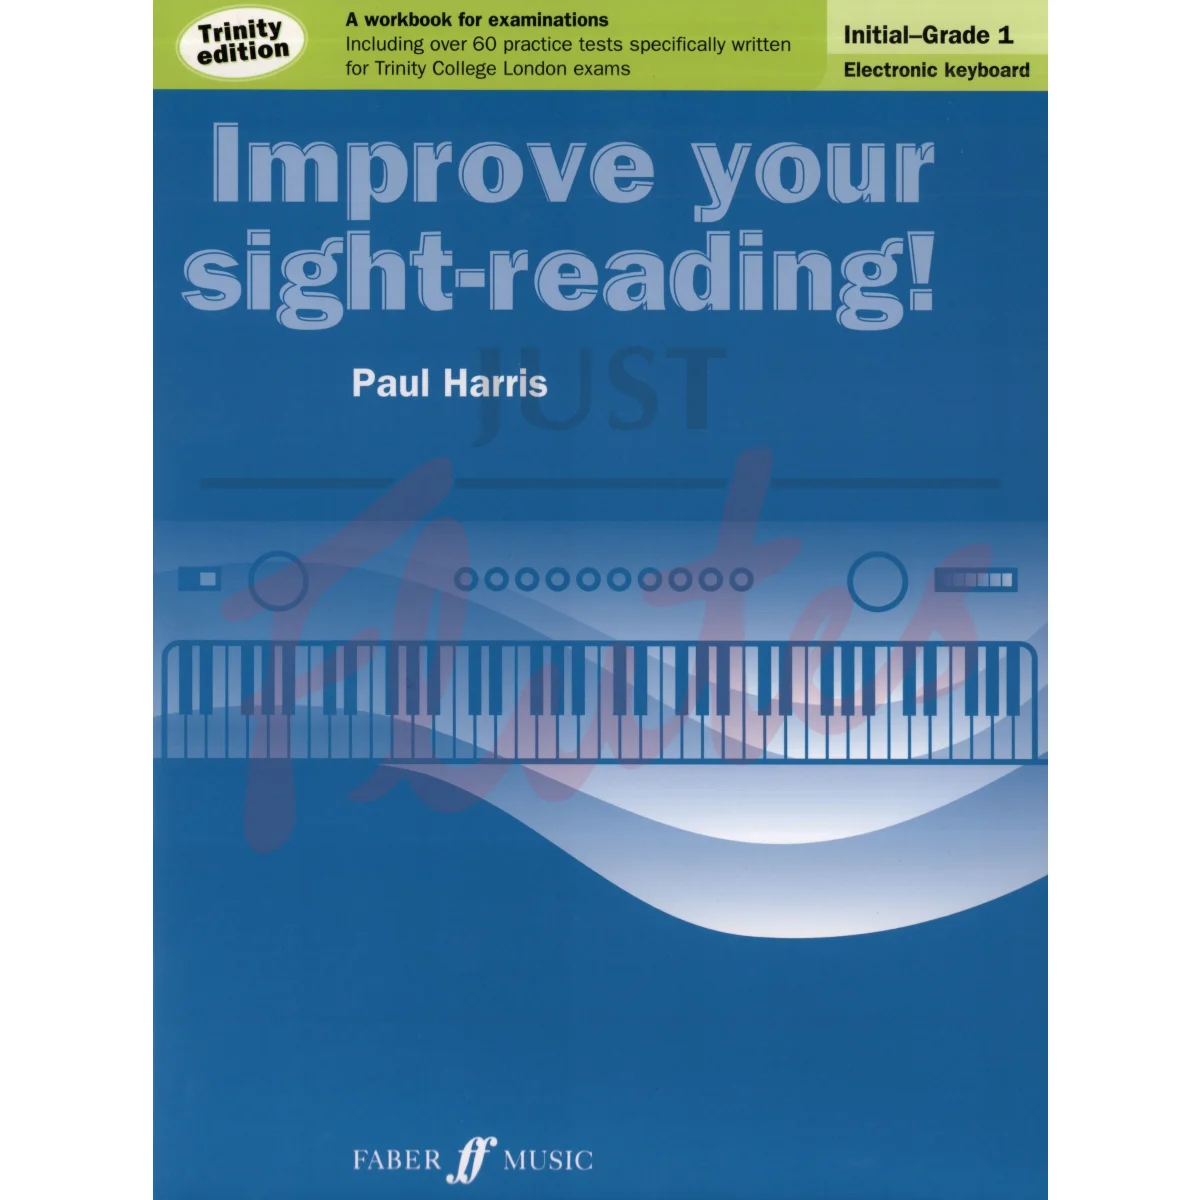 Trinity Improve Your Sight-Reading Keyboard Inititial-Grade 1